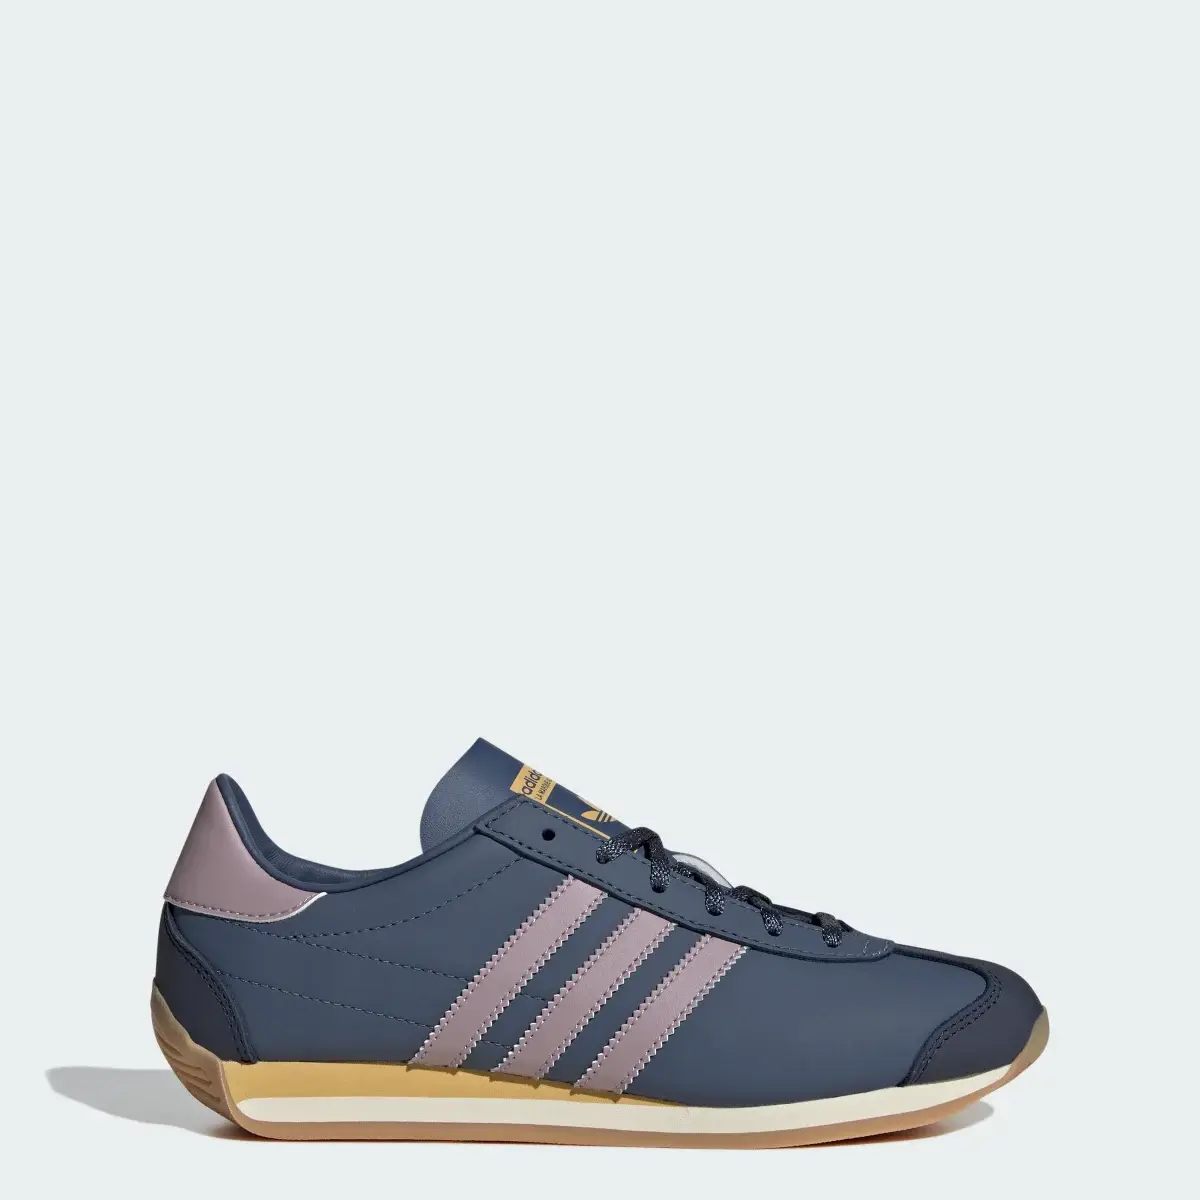 Adidas Country OG Shoes. 1